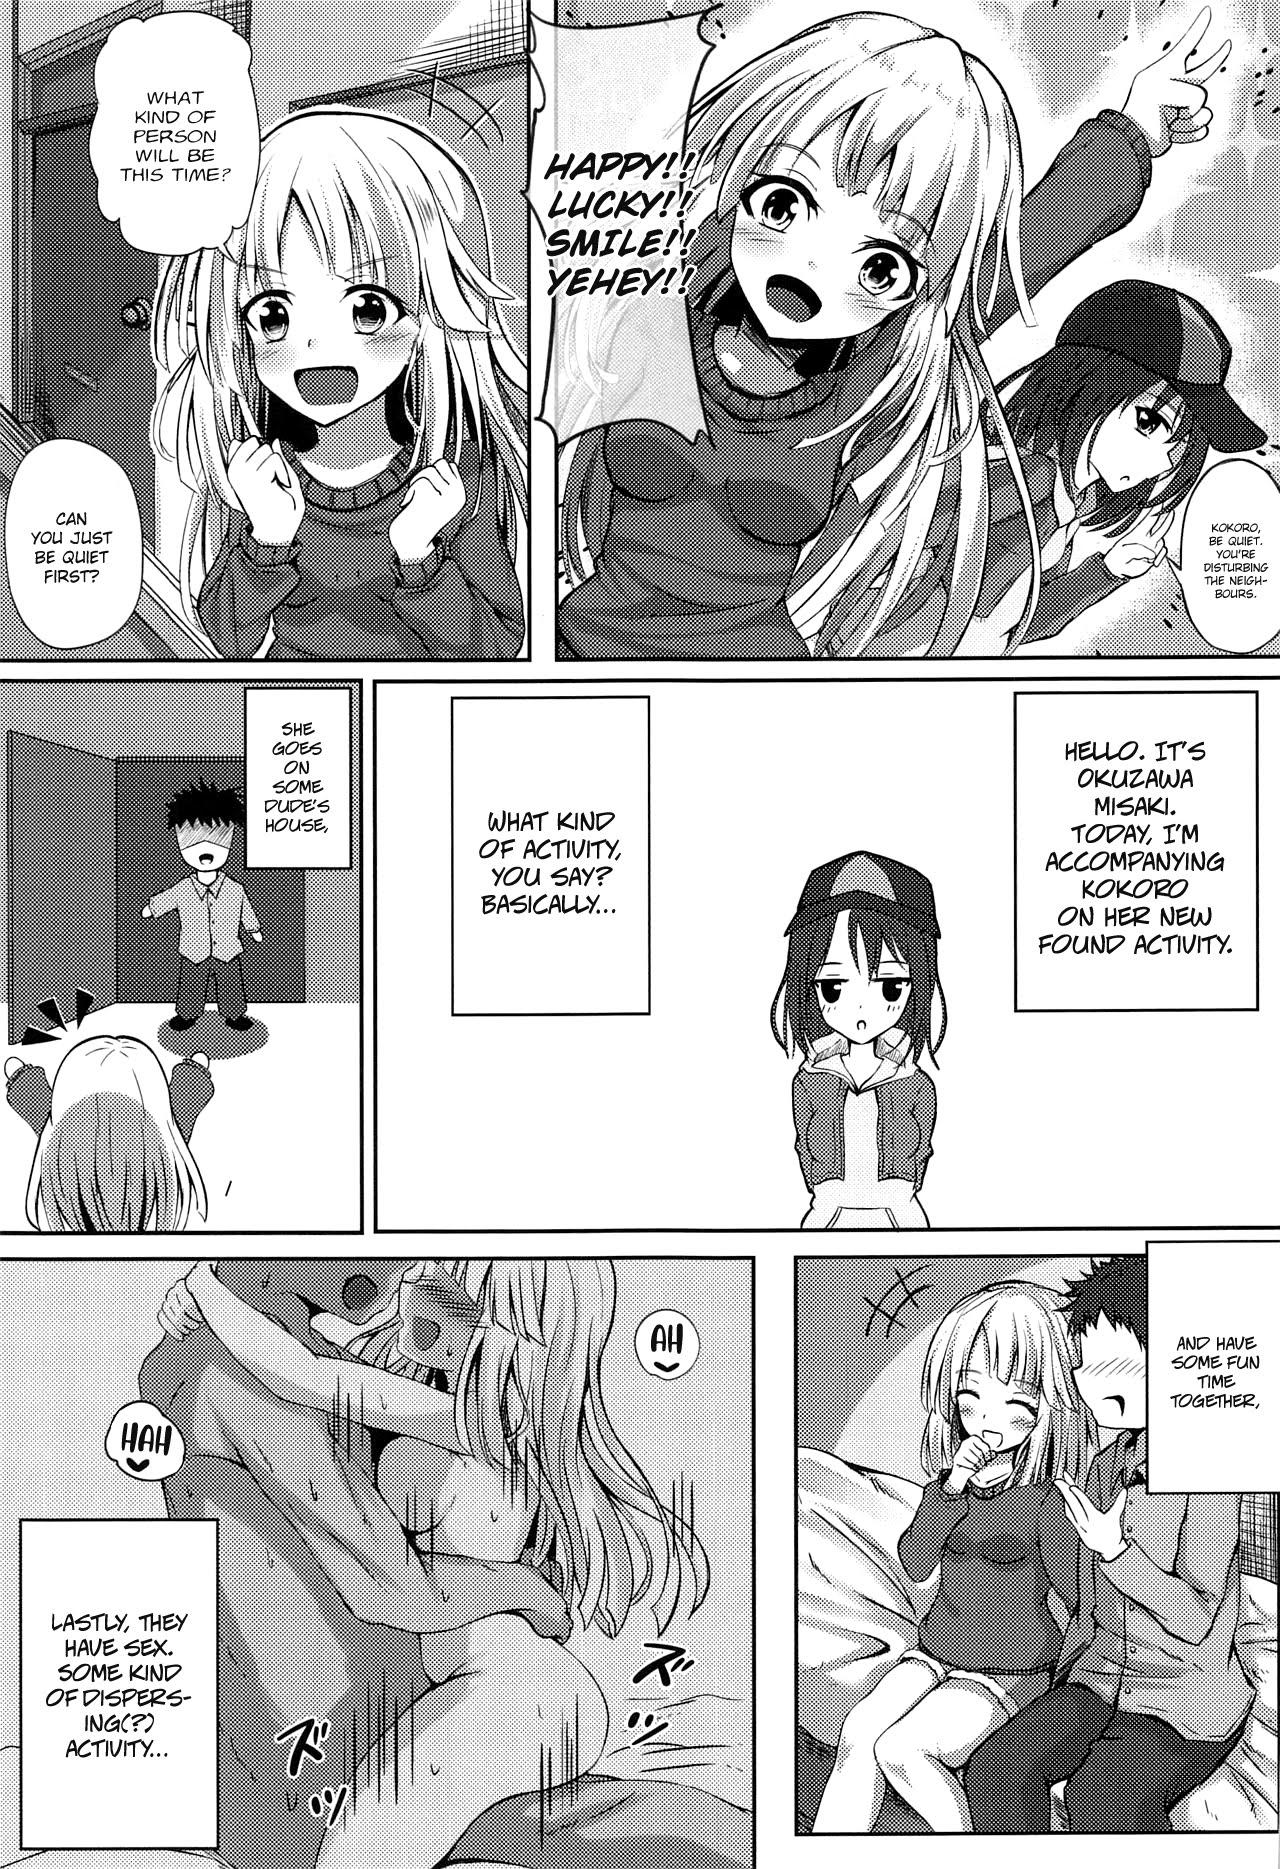 Gapes Gaping Asshole HALLO HAPPY DELIVERY - Bang dream Twink - Page 2